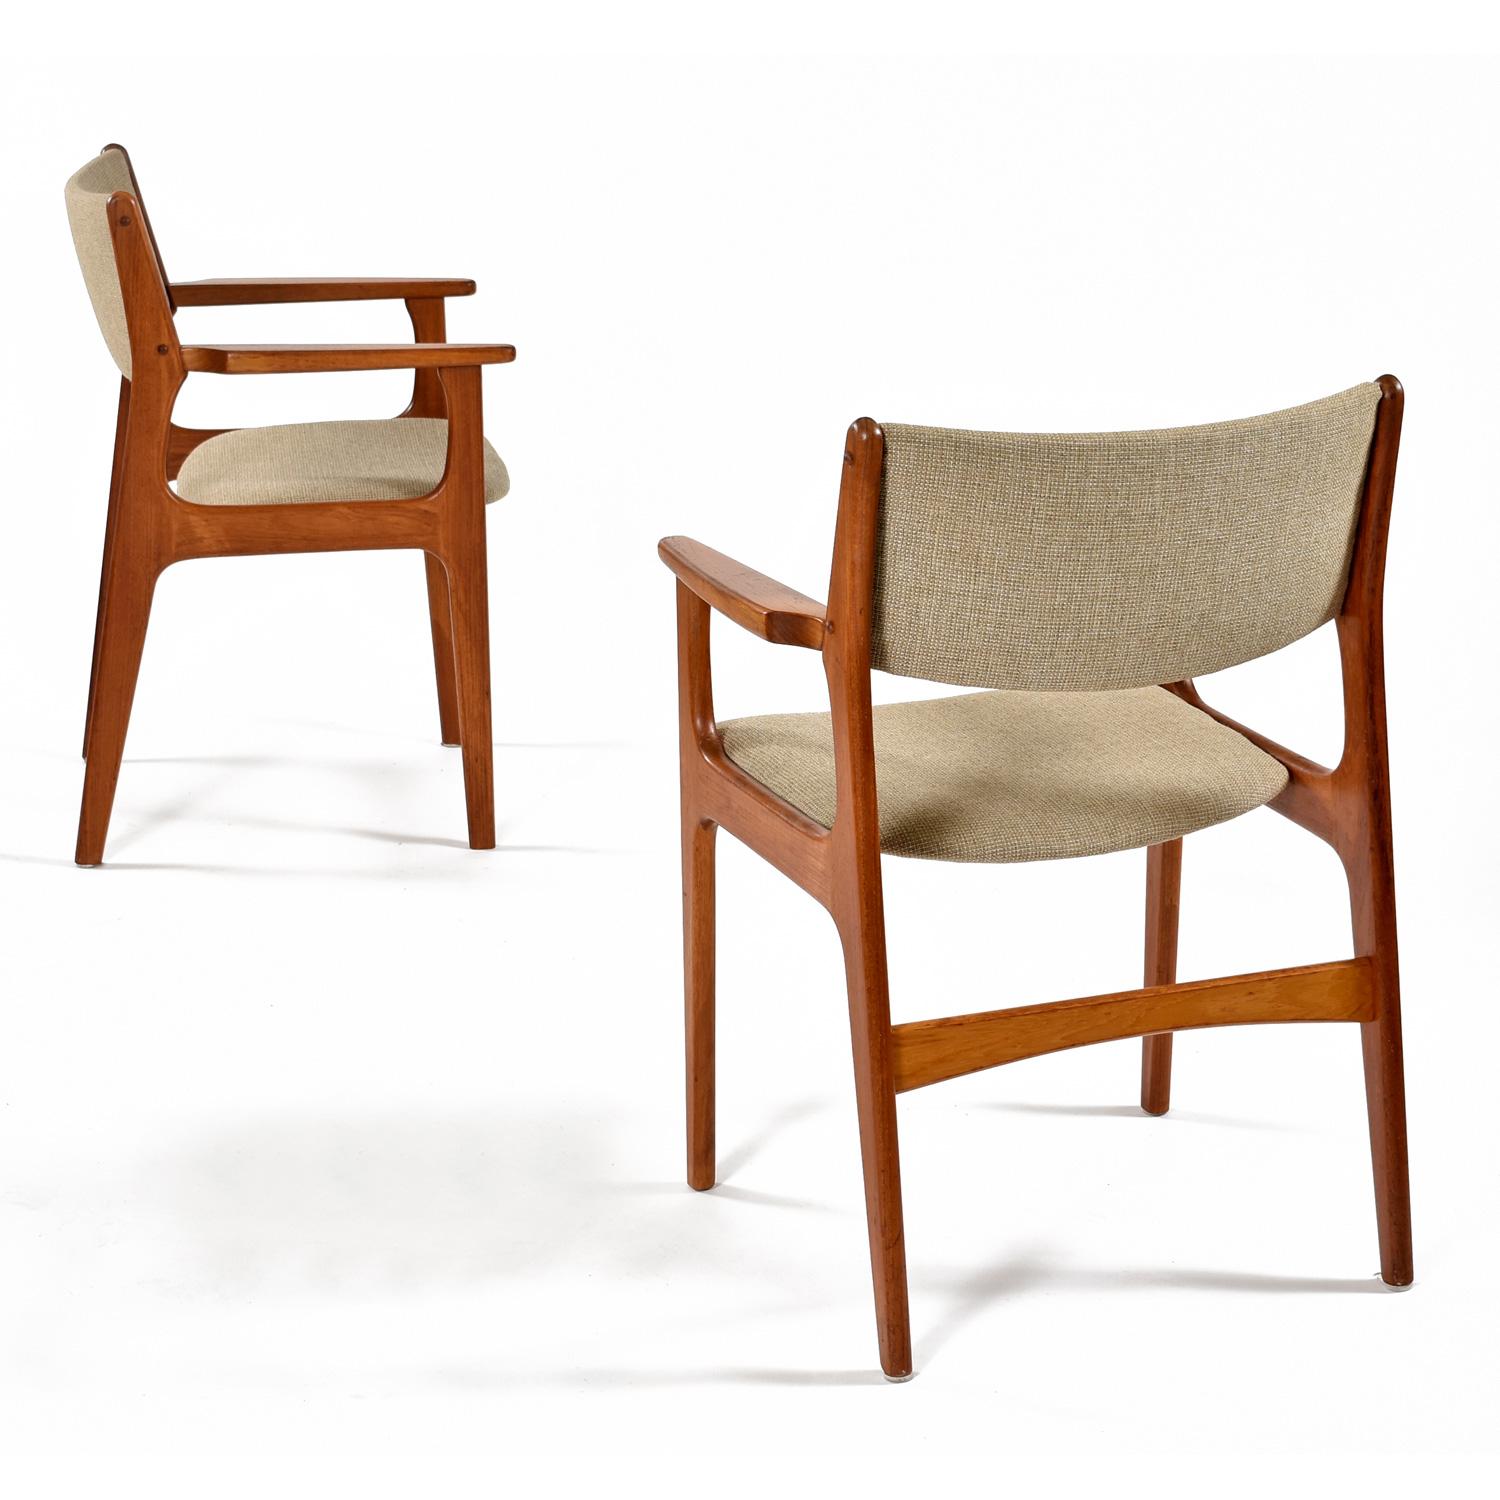 We are pleased to present this set of (8) quality Danish teak dining chairs. Classic, sleek modern design with solid teak frames. A combination of (2) armchairs and (6) arm-less chairs. Recently reupholstered in a toasty oatmeal tweed fabric with